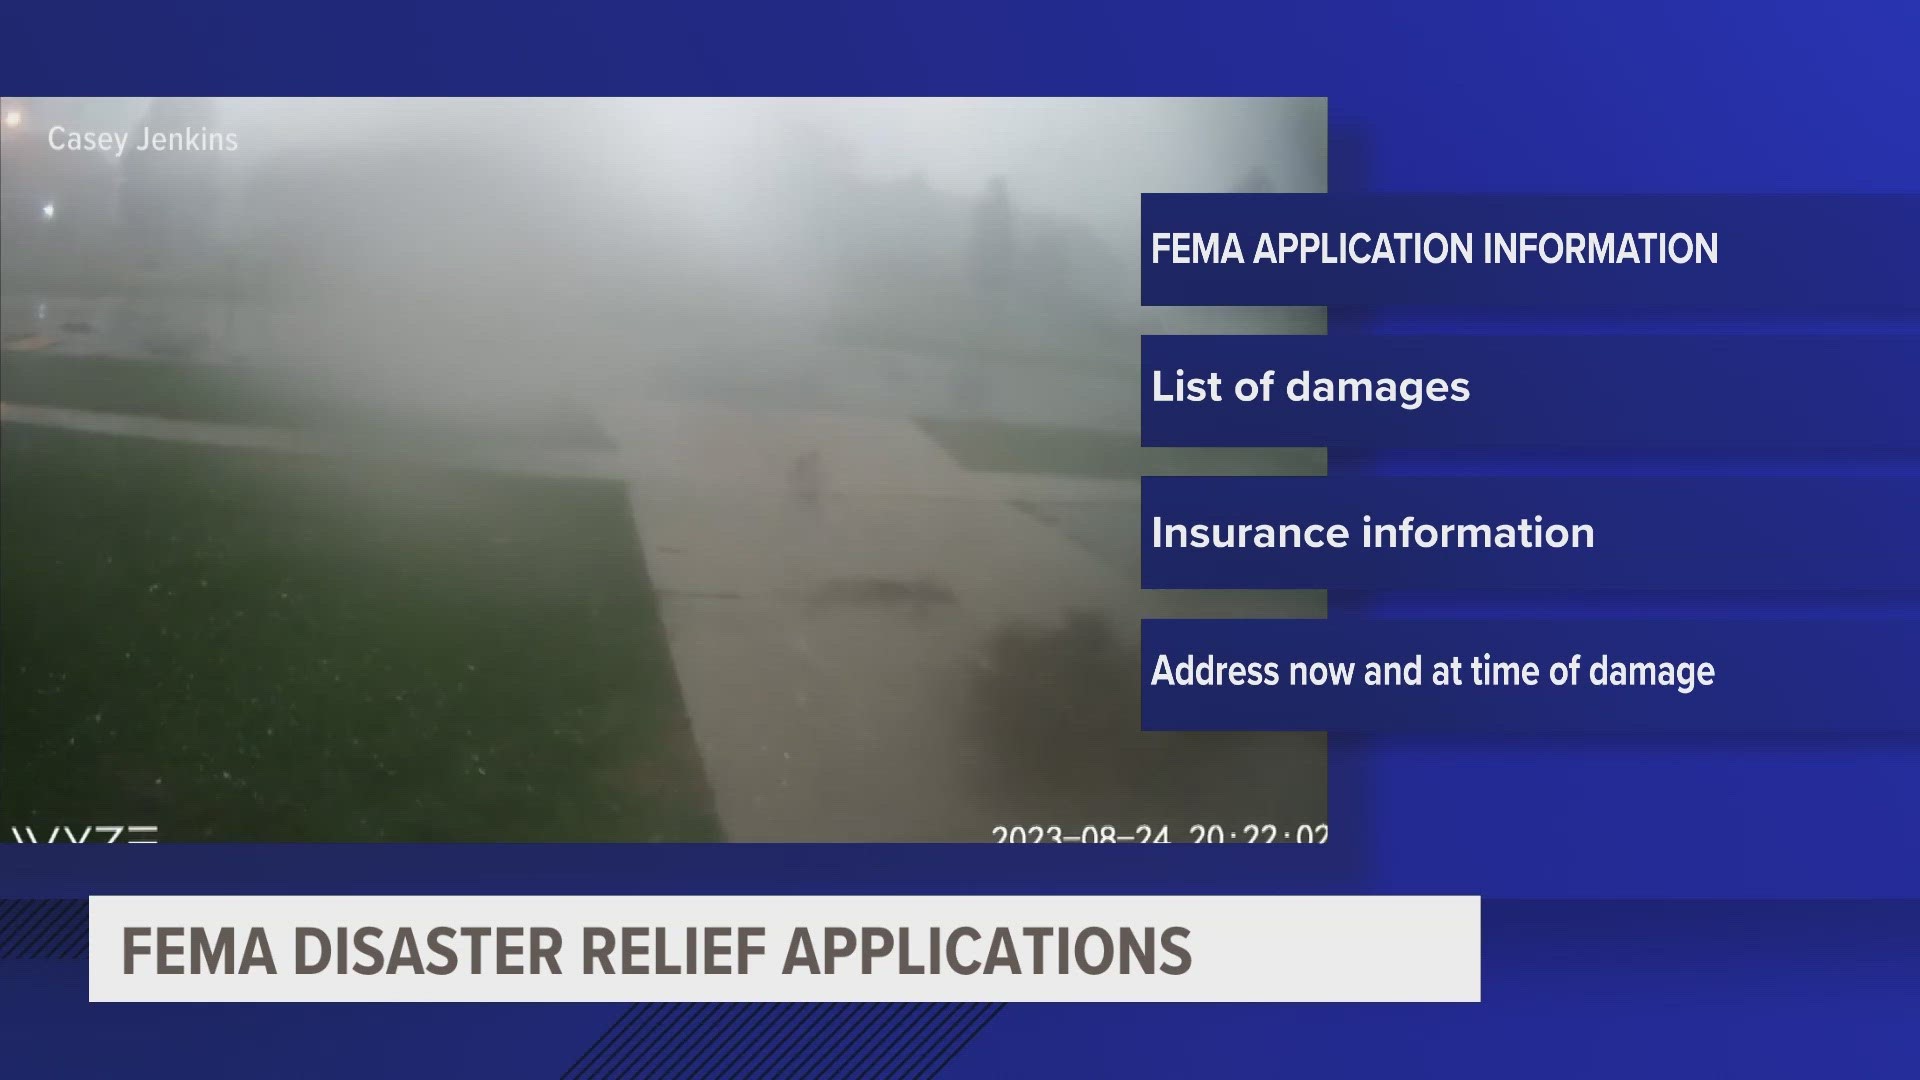 Eligible Michigan residents in Eaton, Ingham, Ionia, Kent, Livingston, Macomb, Monroe, Oakland and Wayne counties can apply for assistance from FEMA.